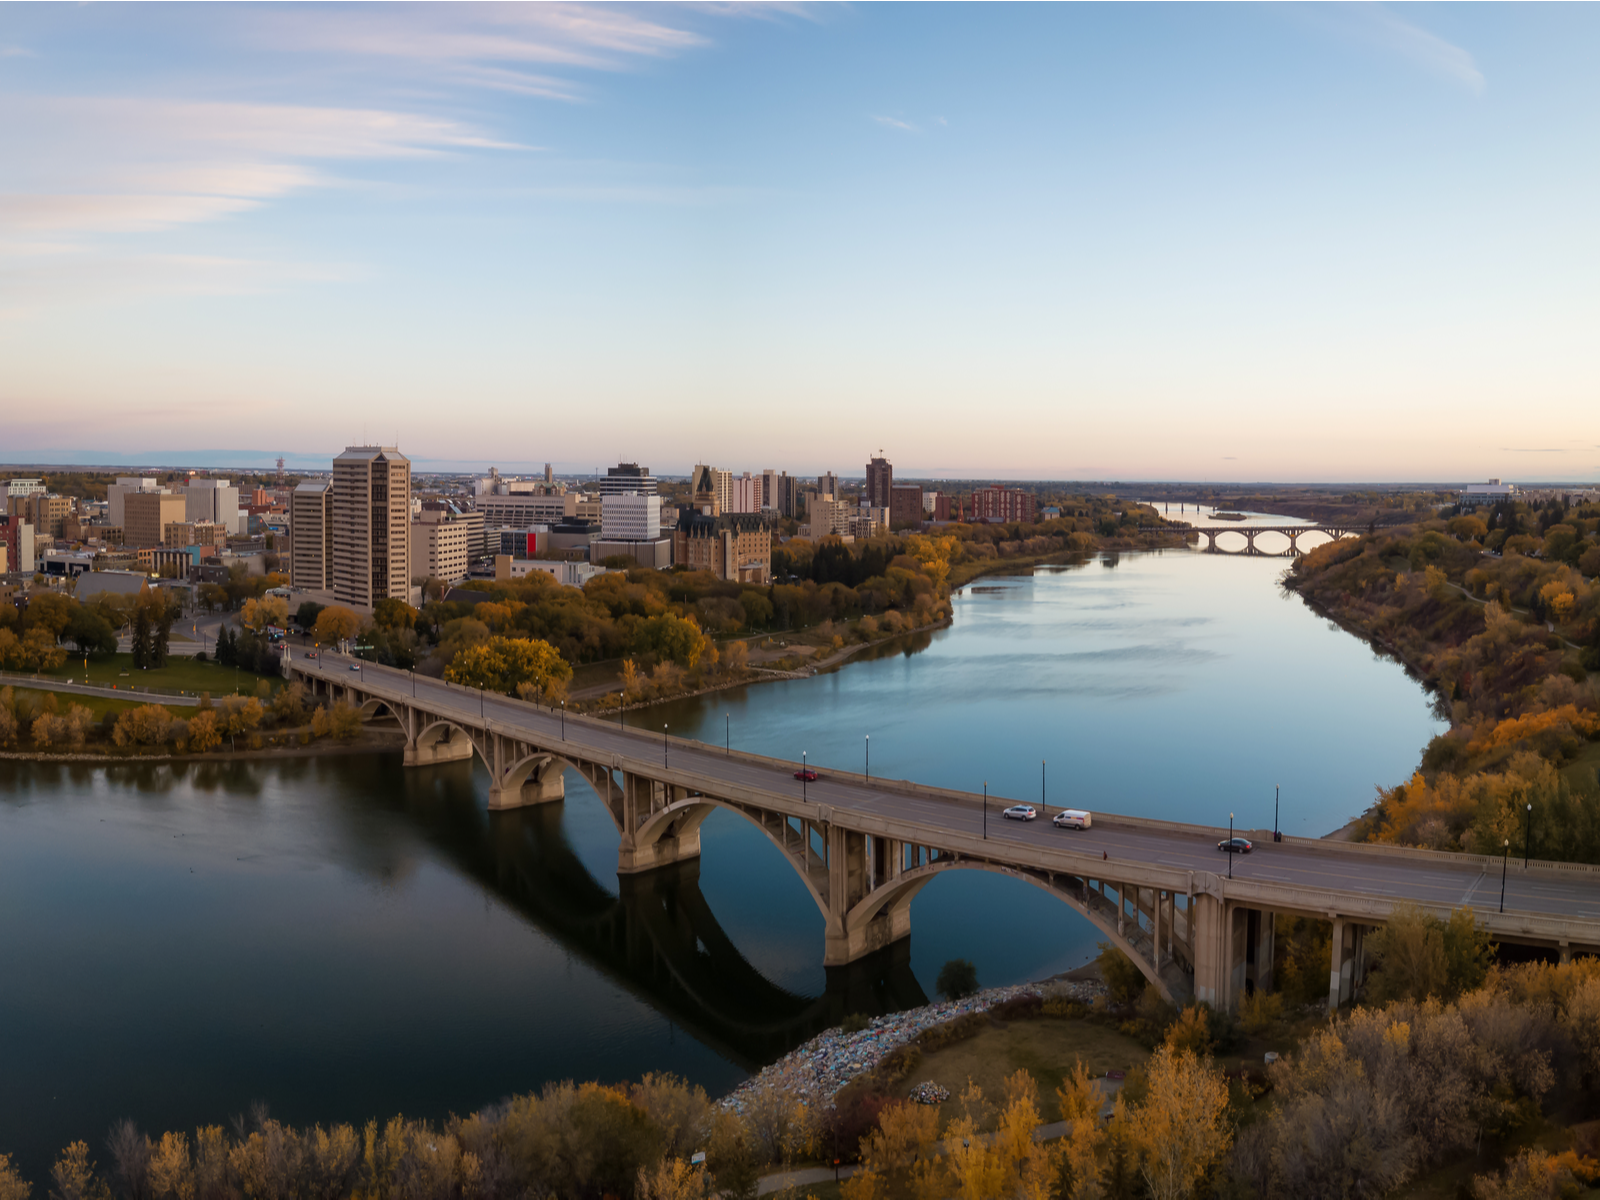 Panoramic view of Saskatoon Skyline and bridges going over the Saskatchewan River in an early morning, one of the best places to visit in Canada